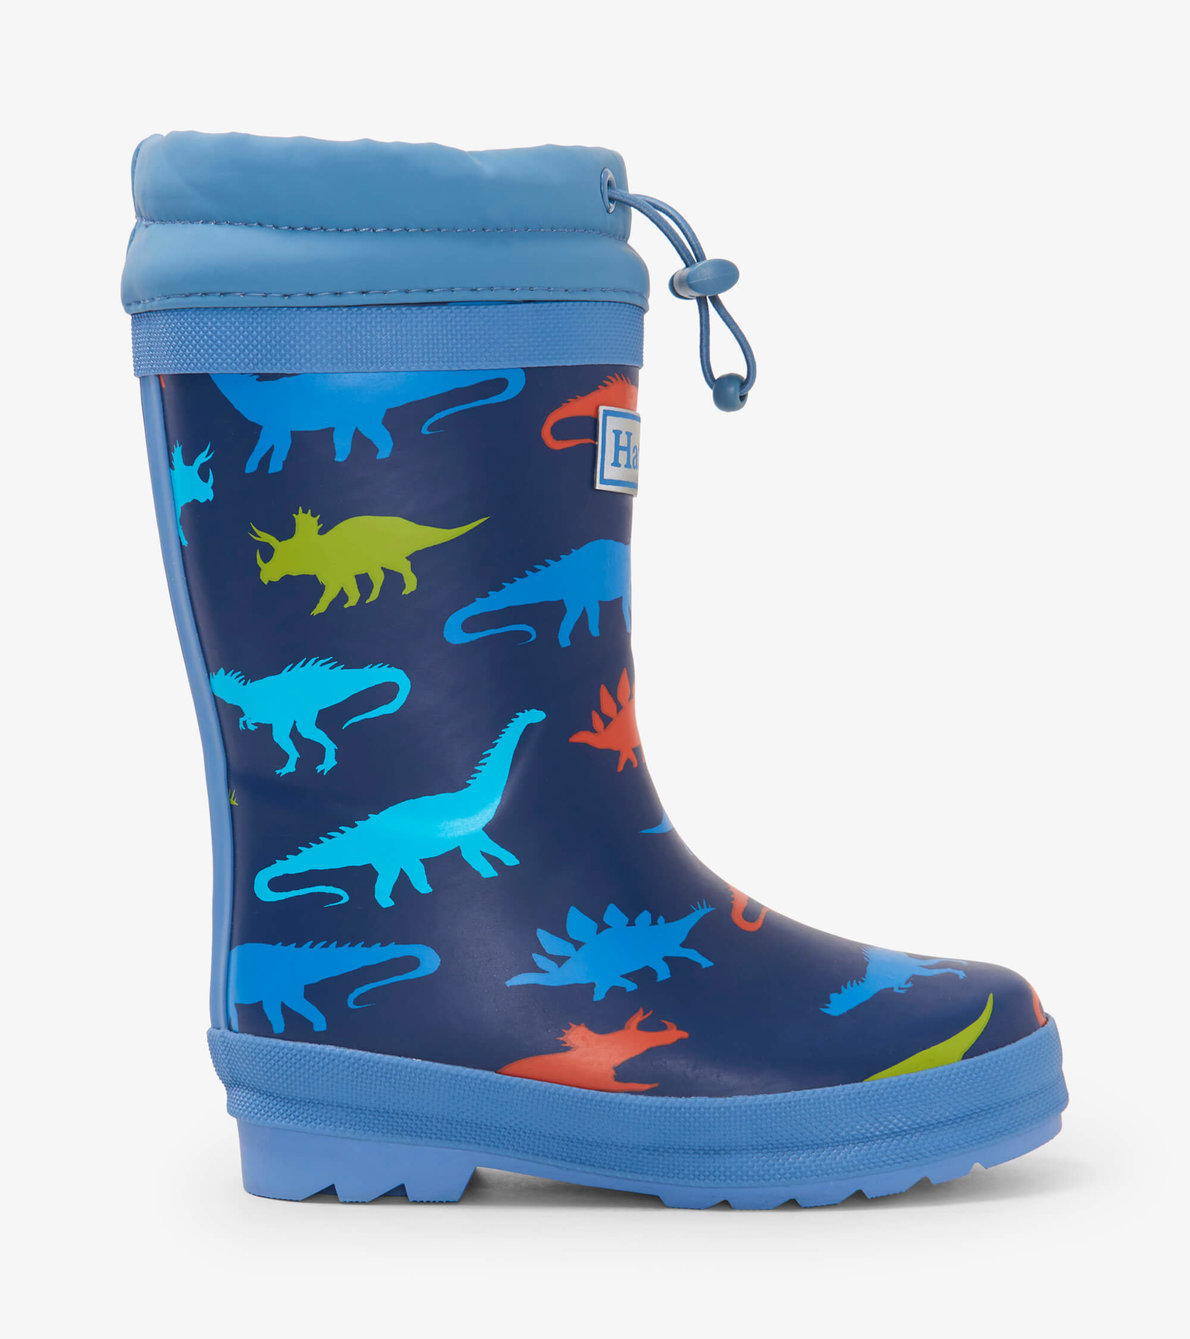 View larger image of Dinosaur Silhouettes Sherpa Lined Kids Rain Boots